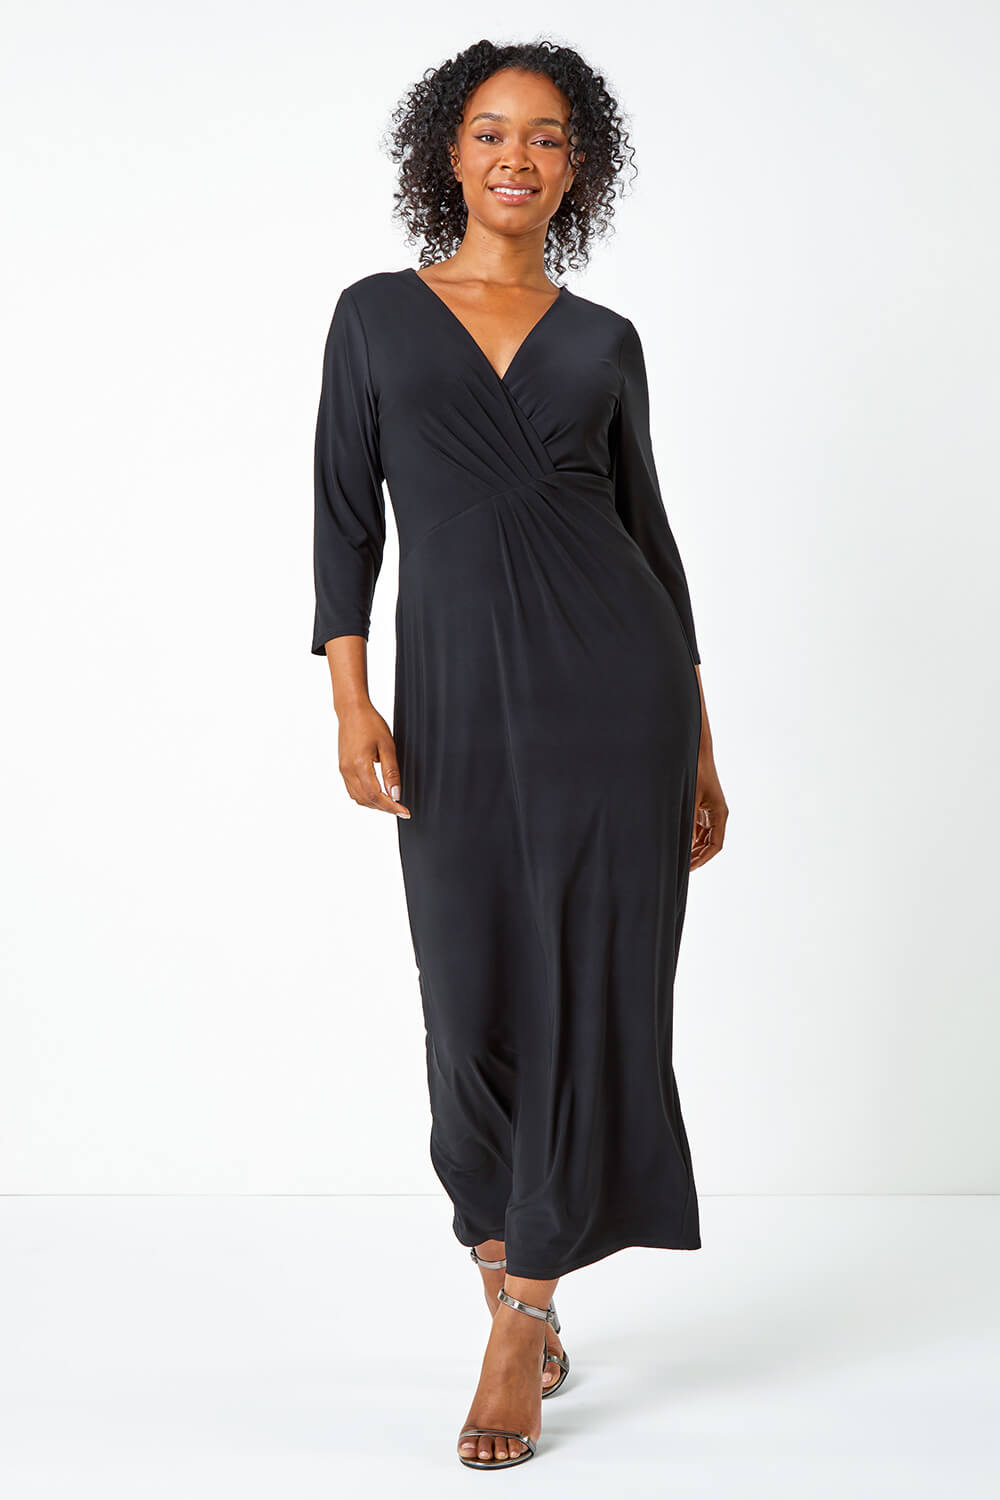 Black Petite Stretch Ruched Maxi Dress, Image 2 of 5